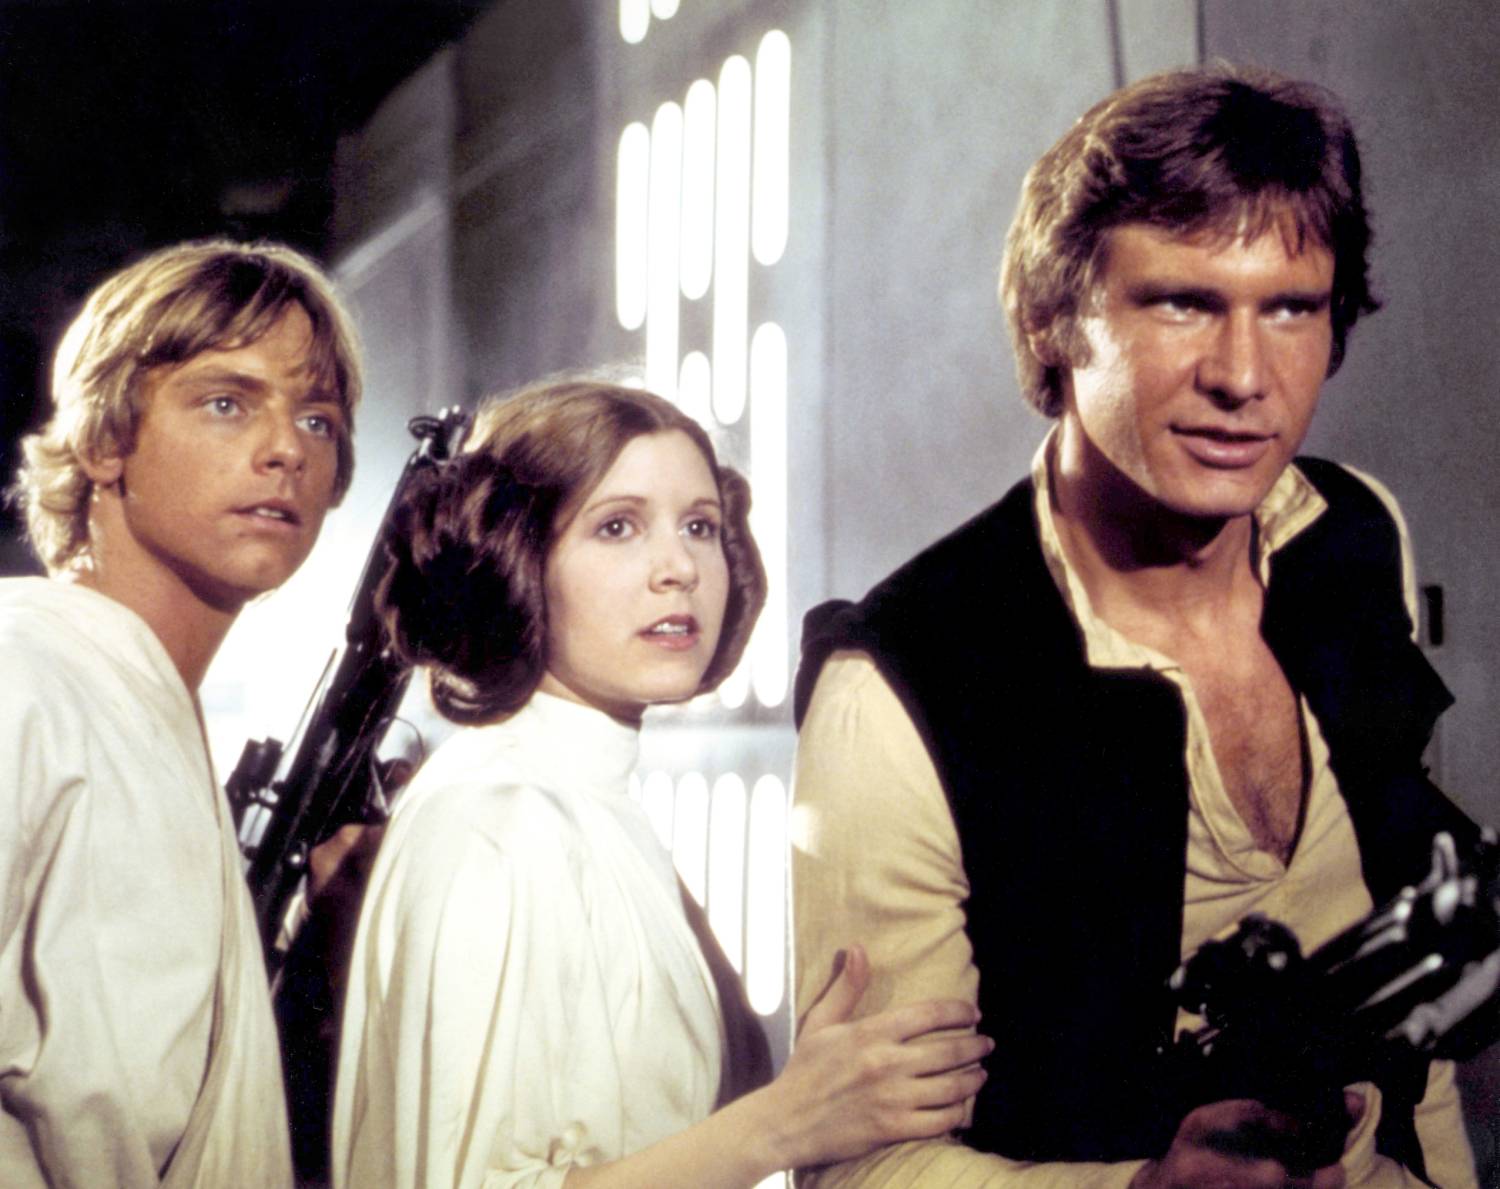 American actors Mark Hamill, Carrie Fisher and Harrison Ford on the set of Star Wars: Episode IV - A New Hope written, directed and produced by Georges Lucas. 